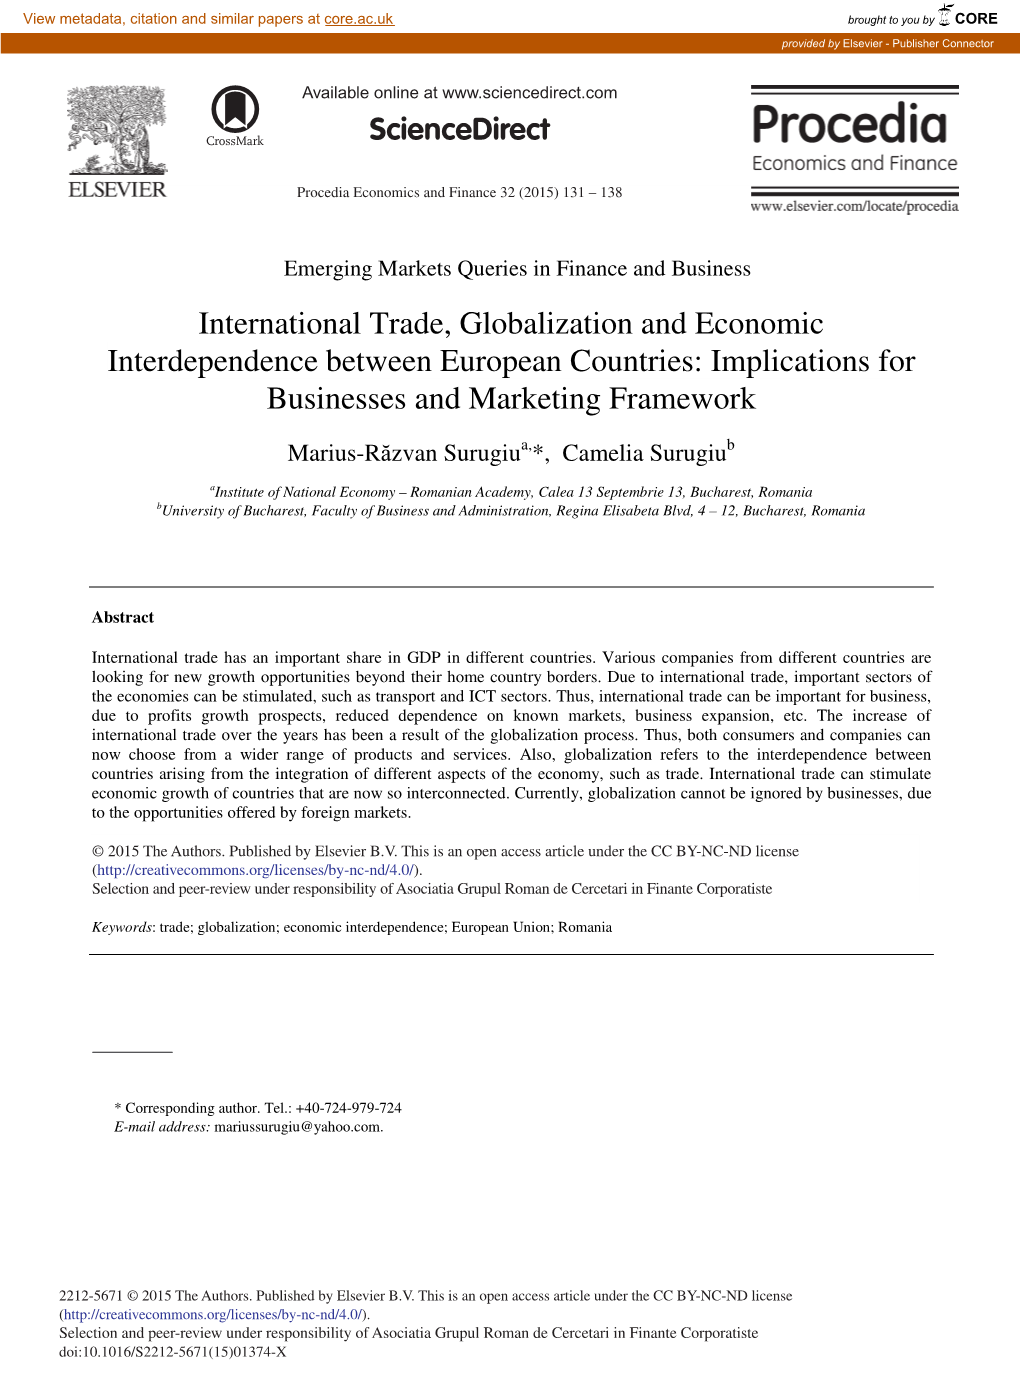 International Trade, Globalization and Economic Interdependence Between European Countries: Implications for Businesses and Marketing Framework